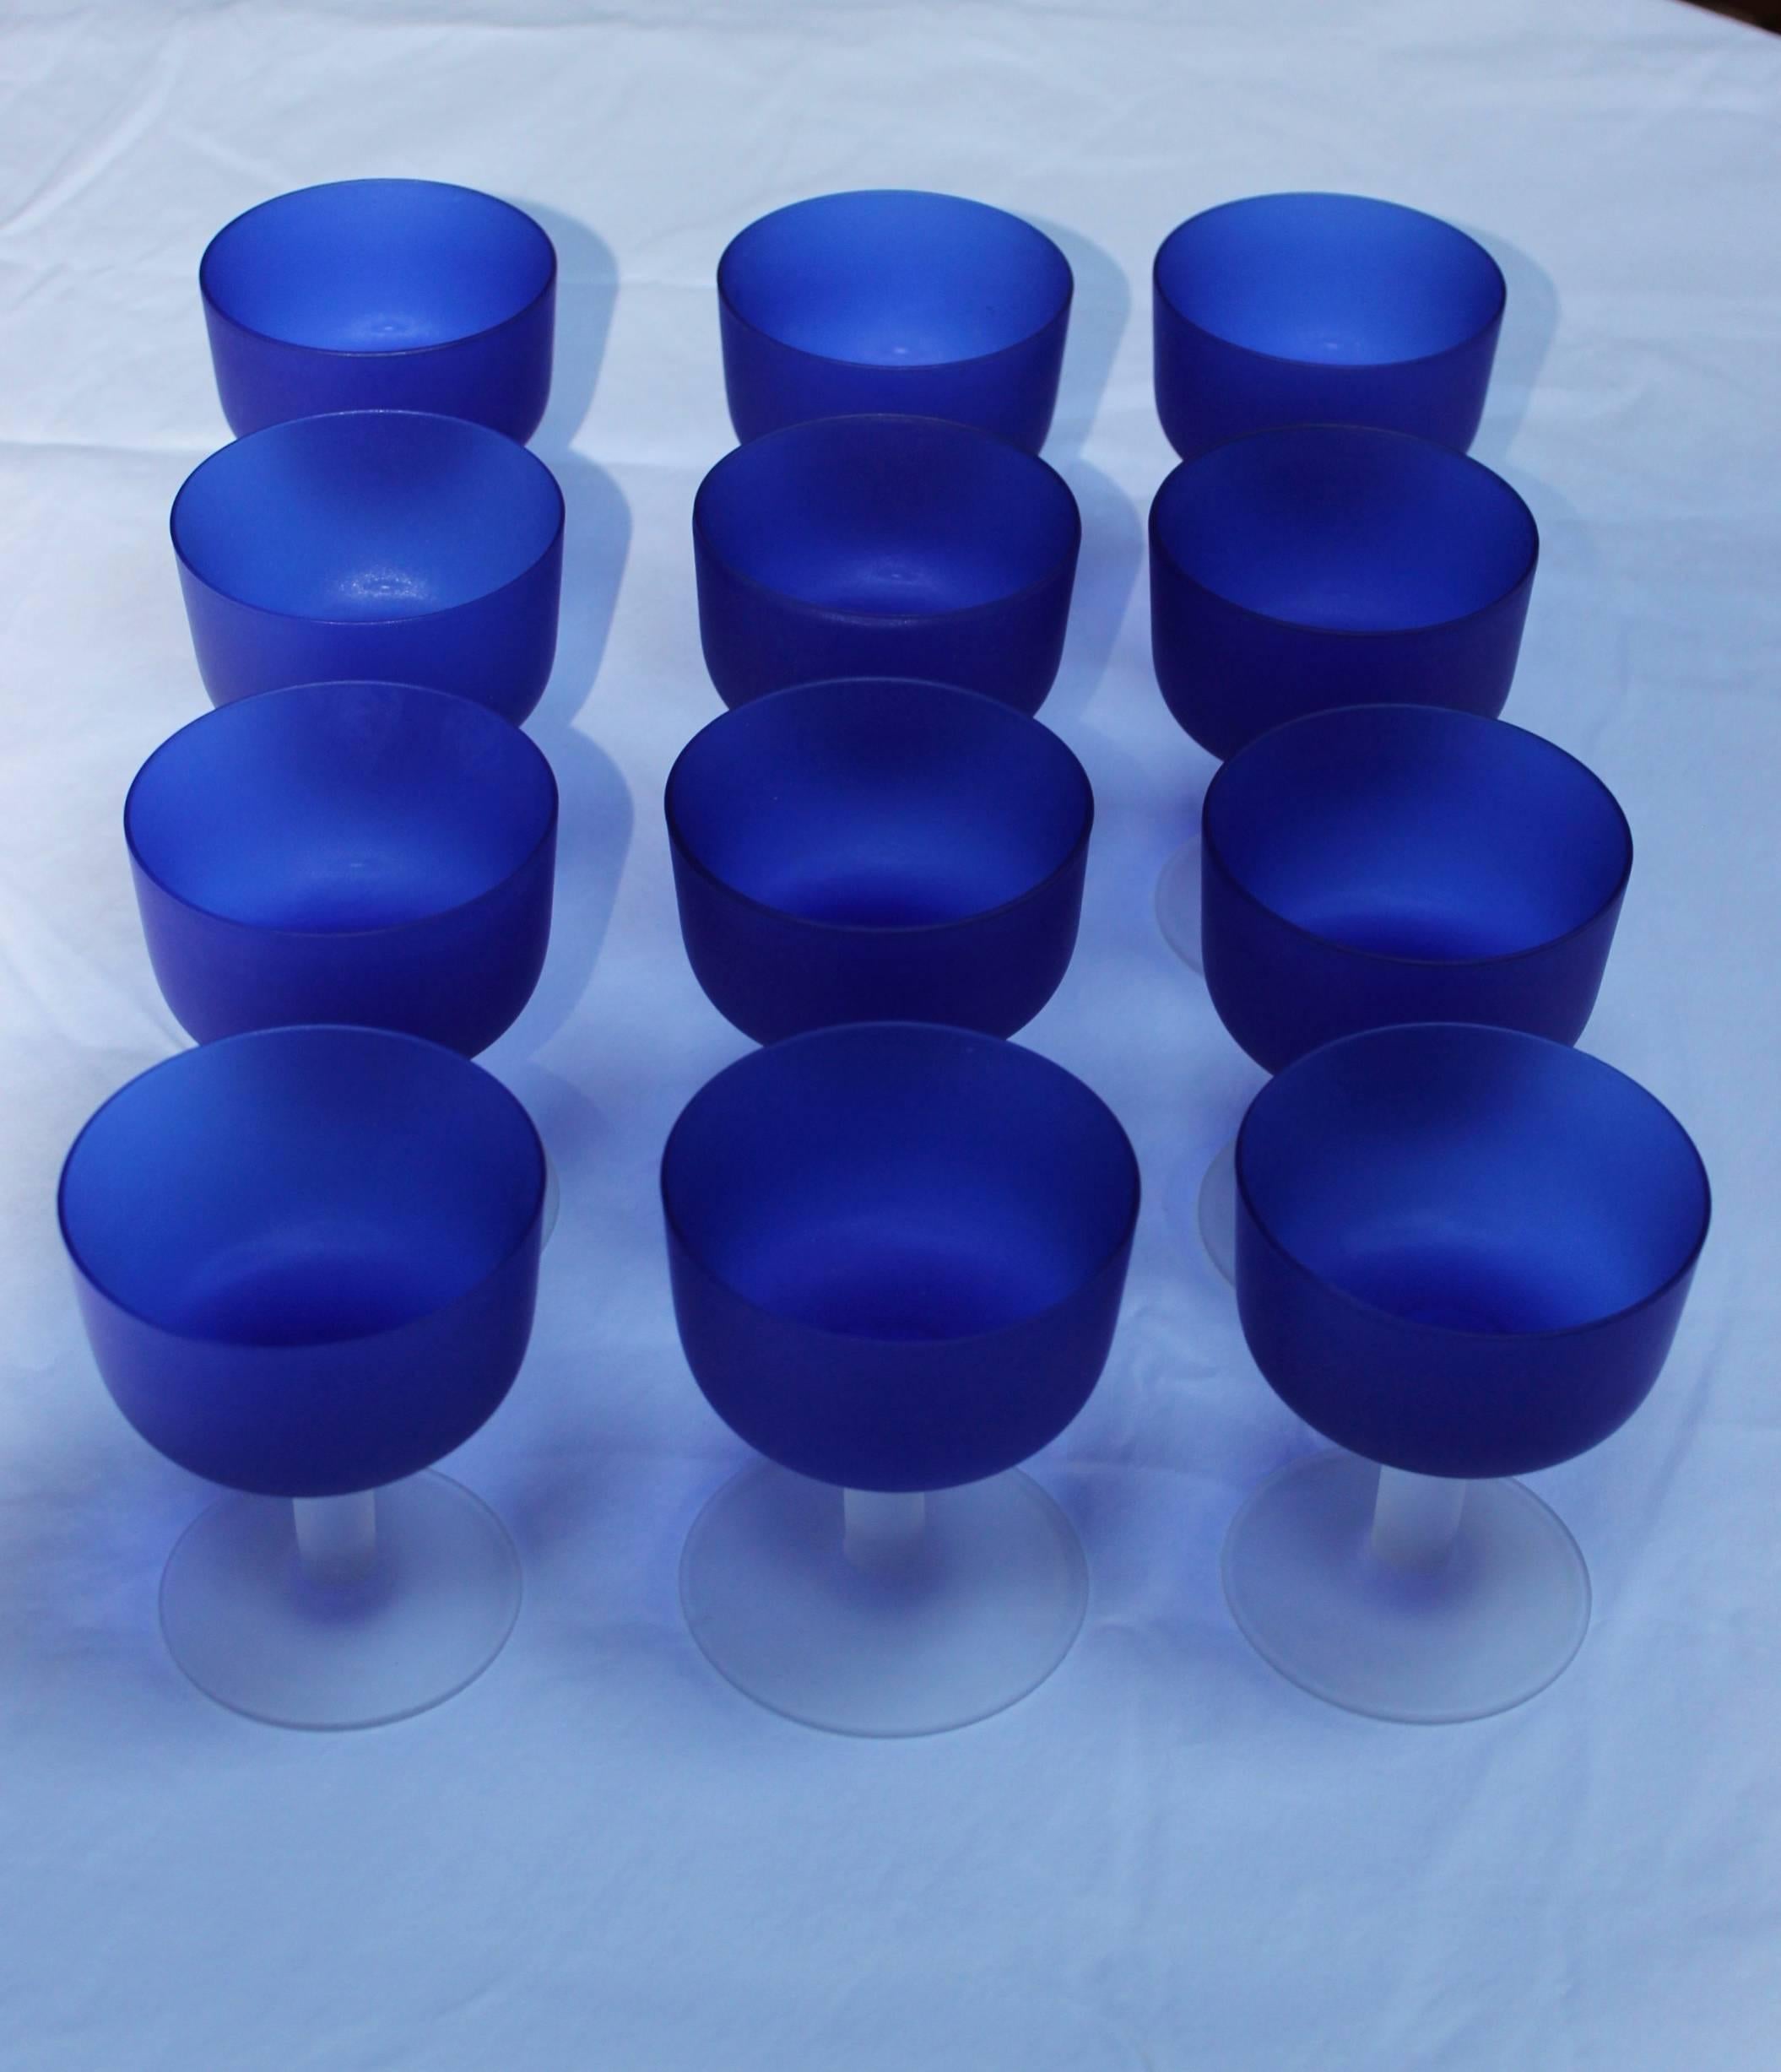 Stunning set of 12 Italian handblown blue glass goblets, six of them still have the original label, in vintage original condition with minor wear and patina due to age and use.